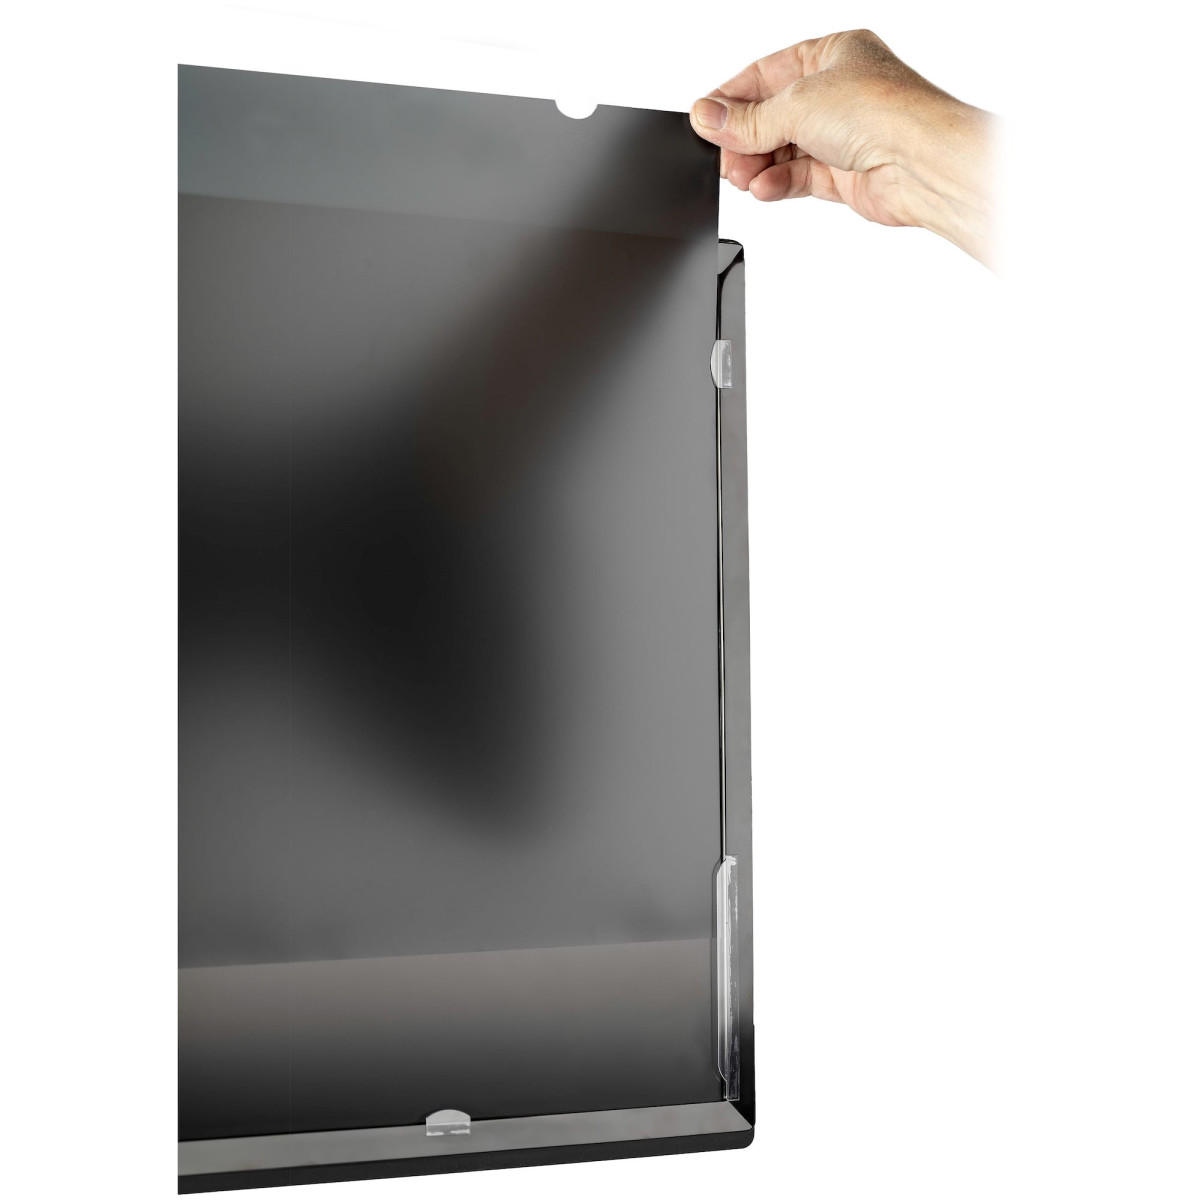 20 inch Monitor Privacy Screen Filter